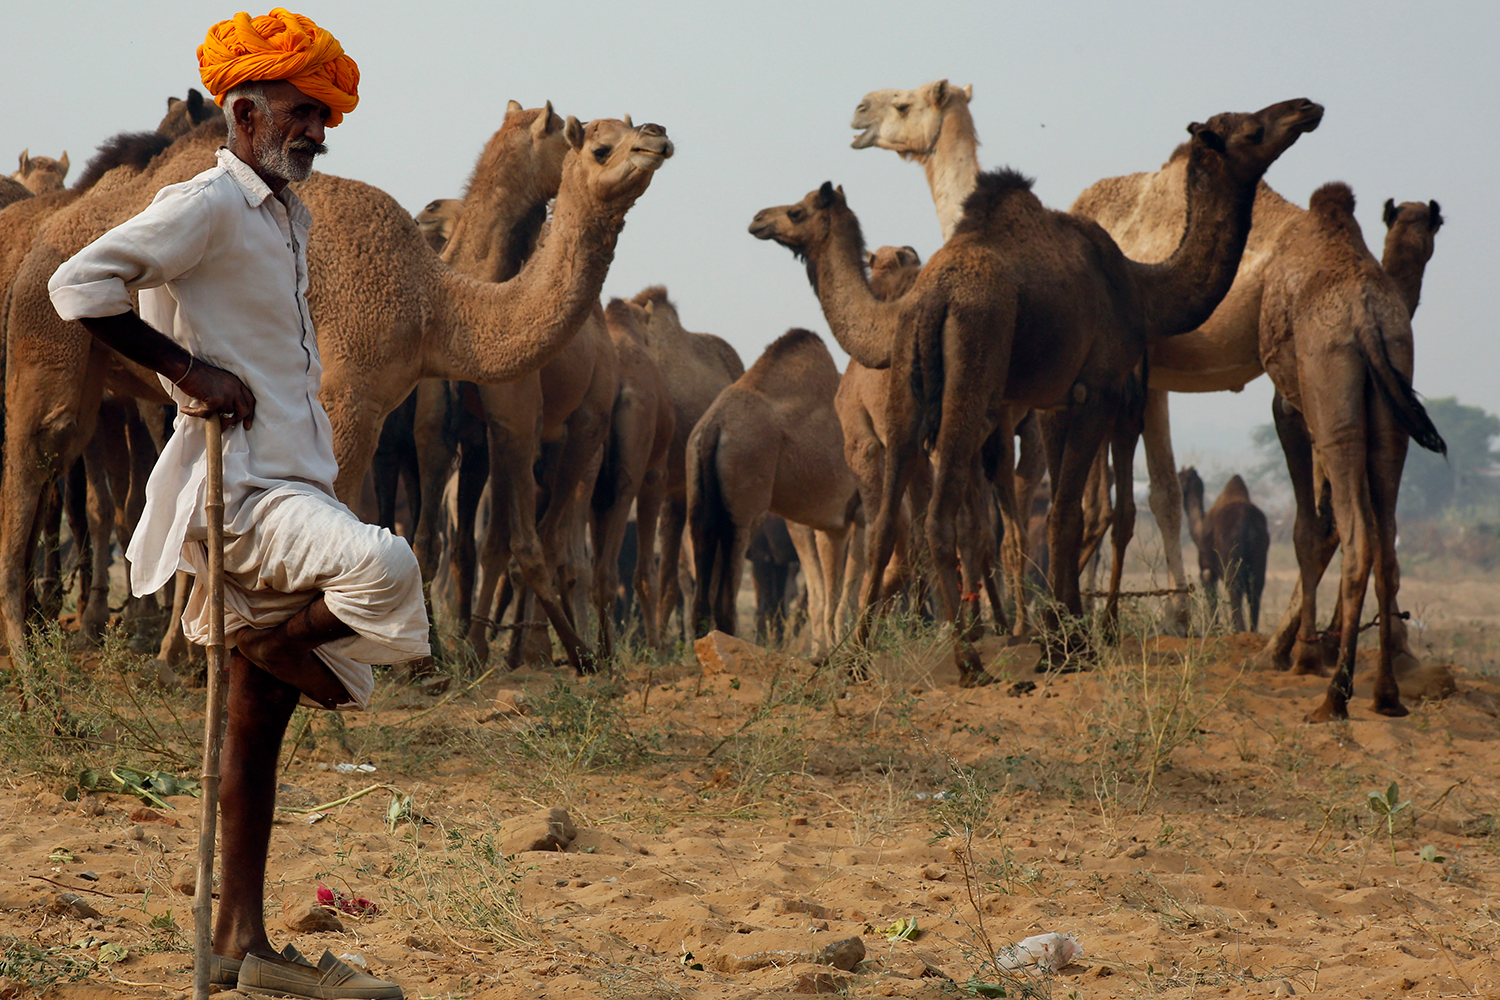 11,000 camels head to the desert for the largest fair of Asia